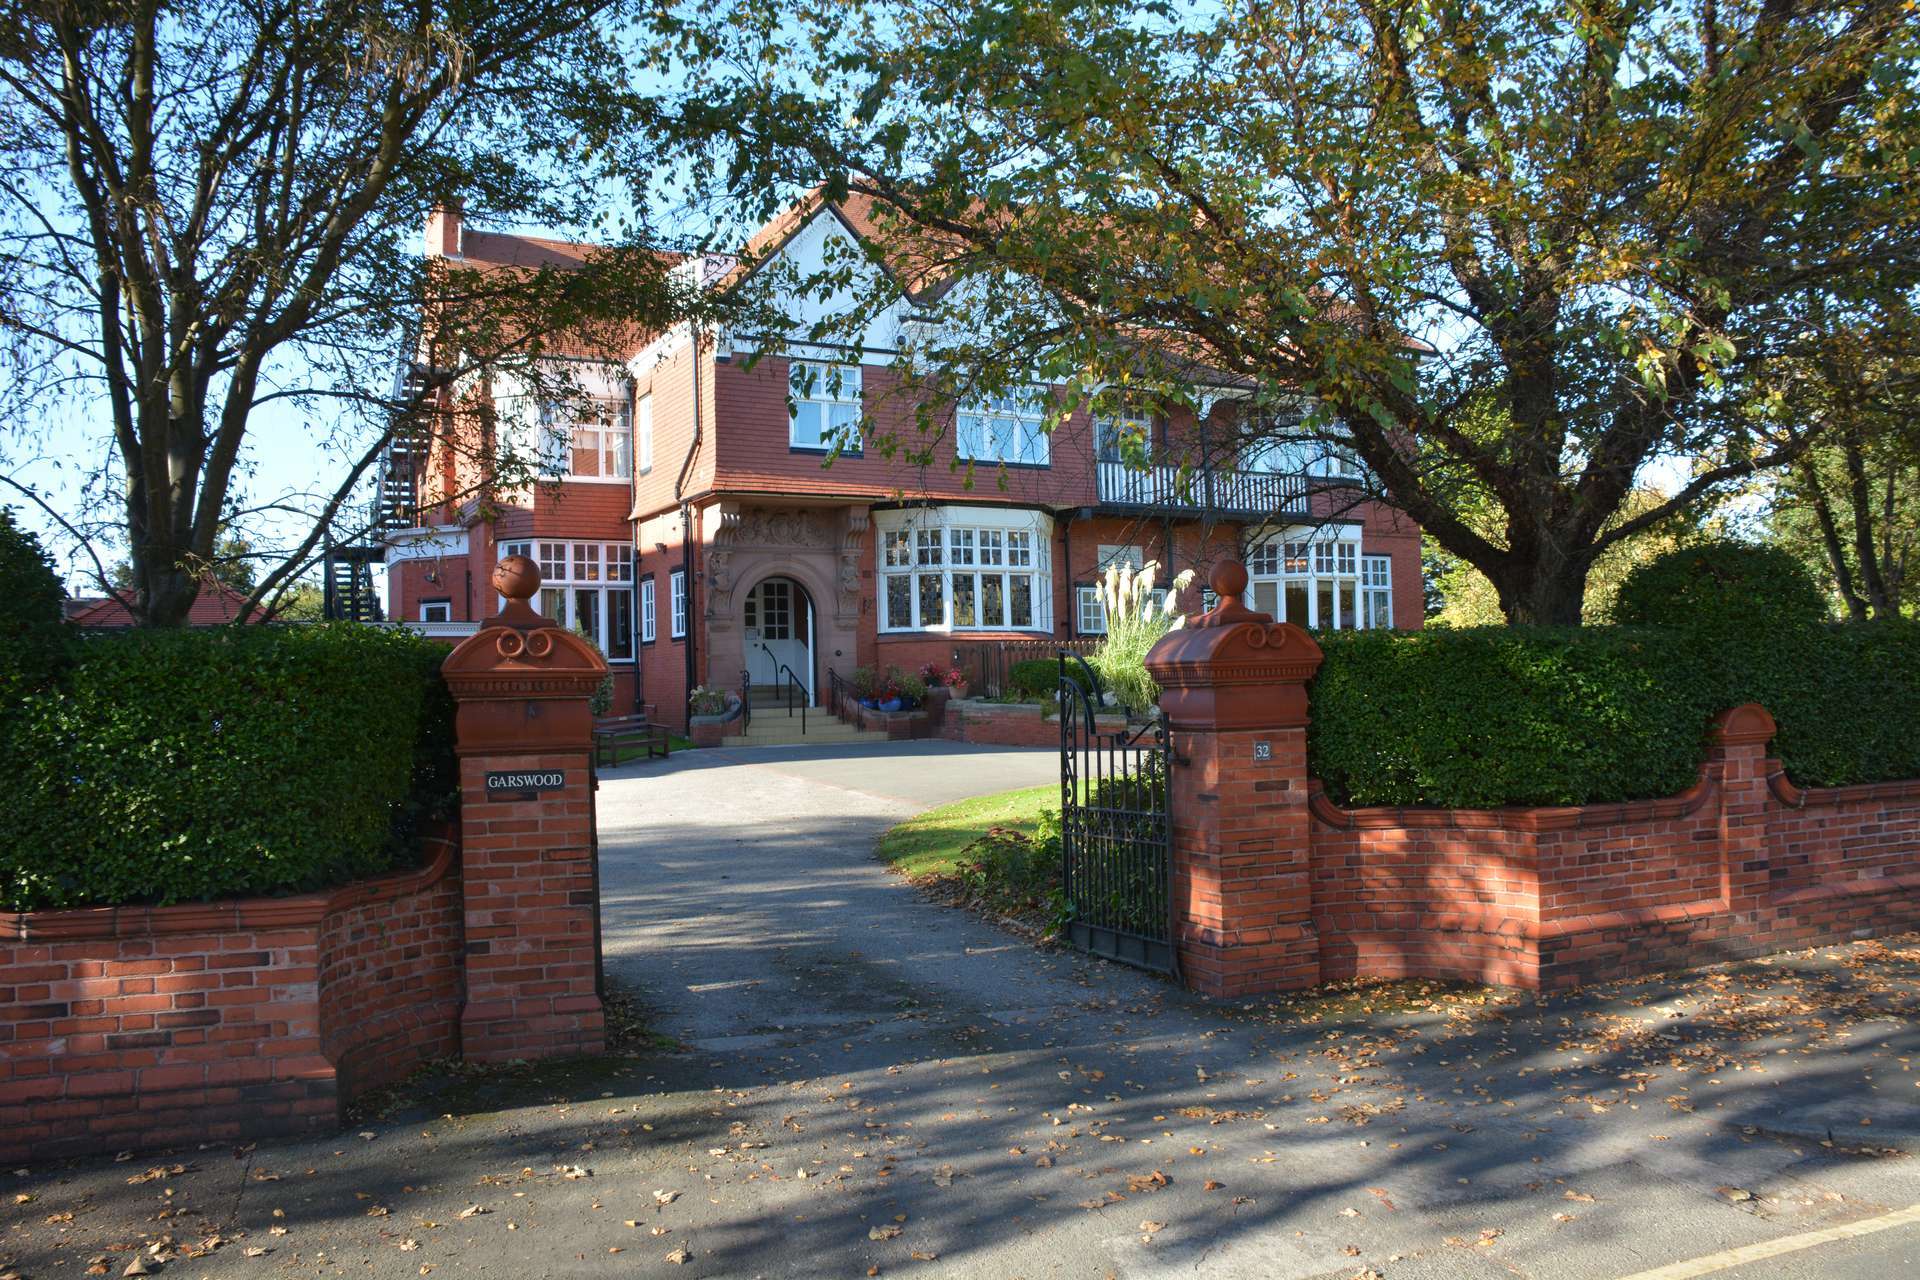 CCH Image displaying the gates at garswood